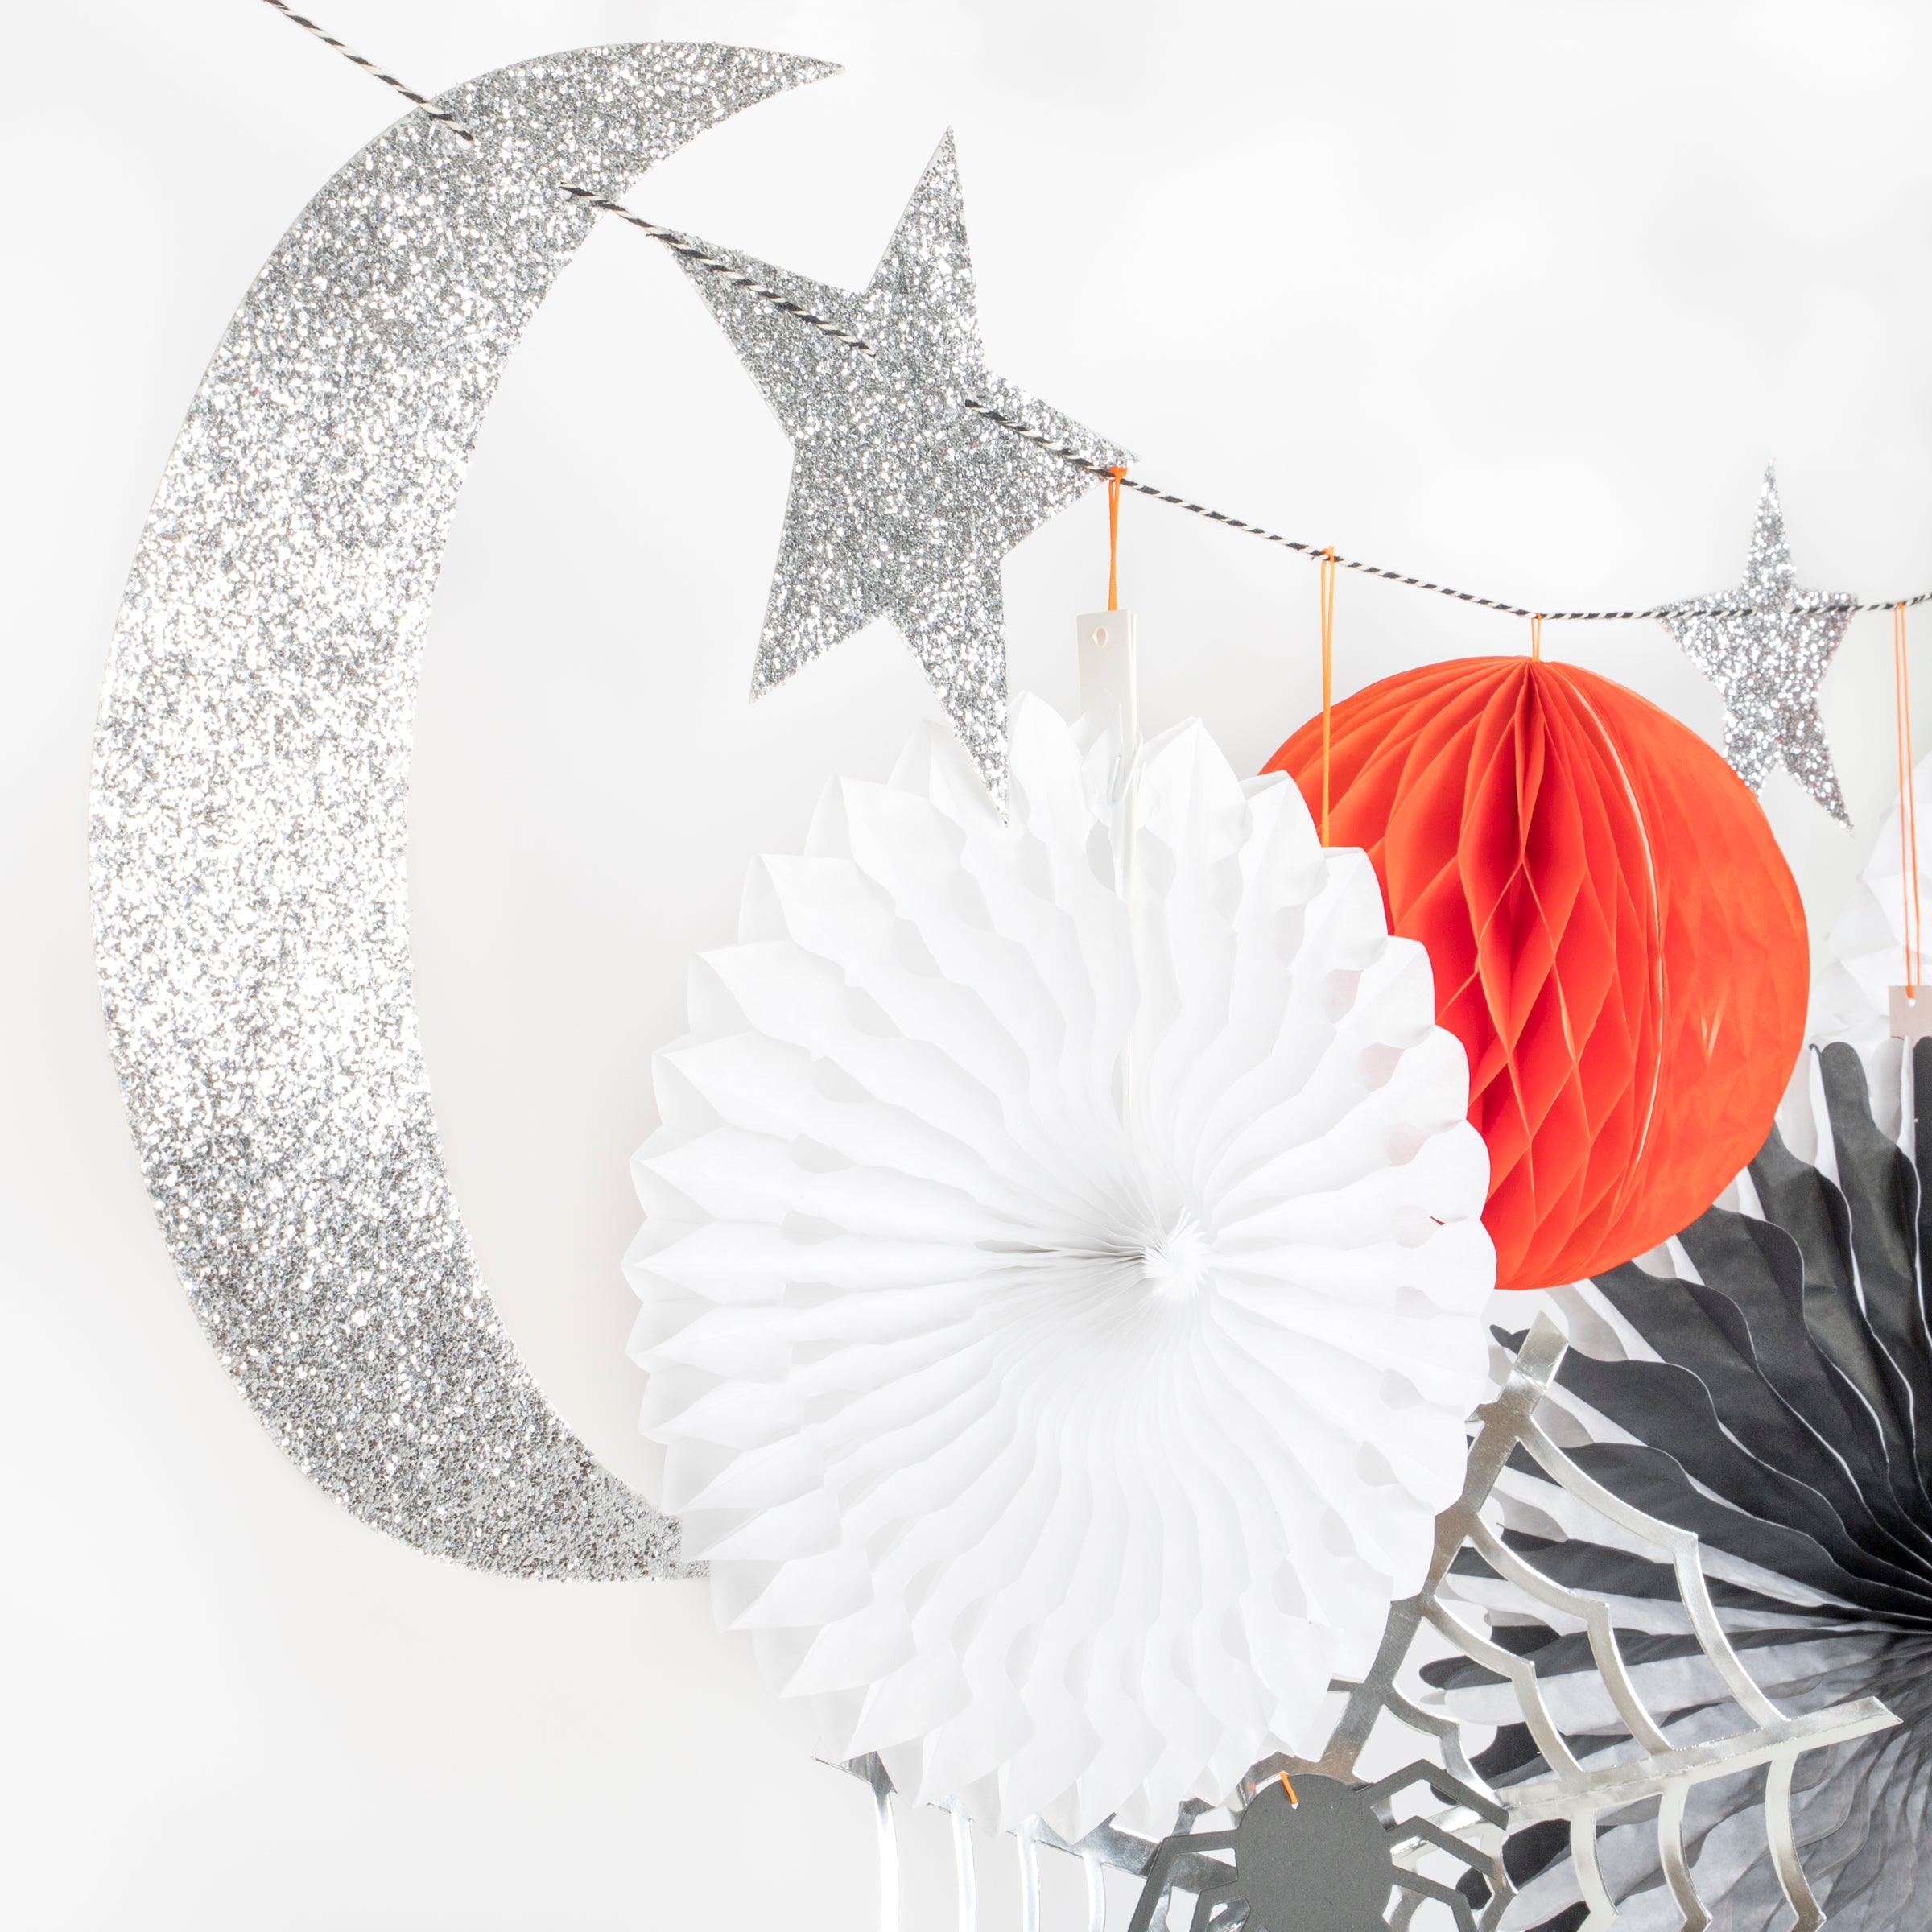 Our Halloween wall decoration features spiders, cobwebs, pinwheels, stars, honeycomb balls and a moon.